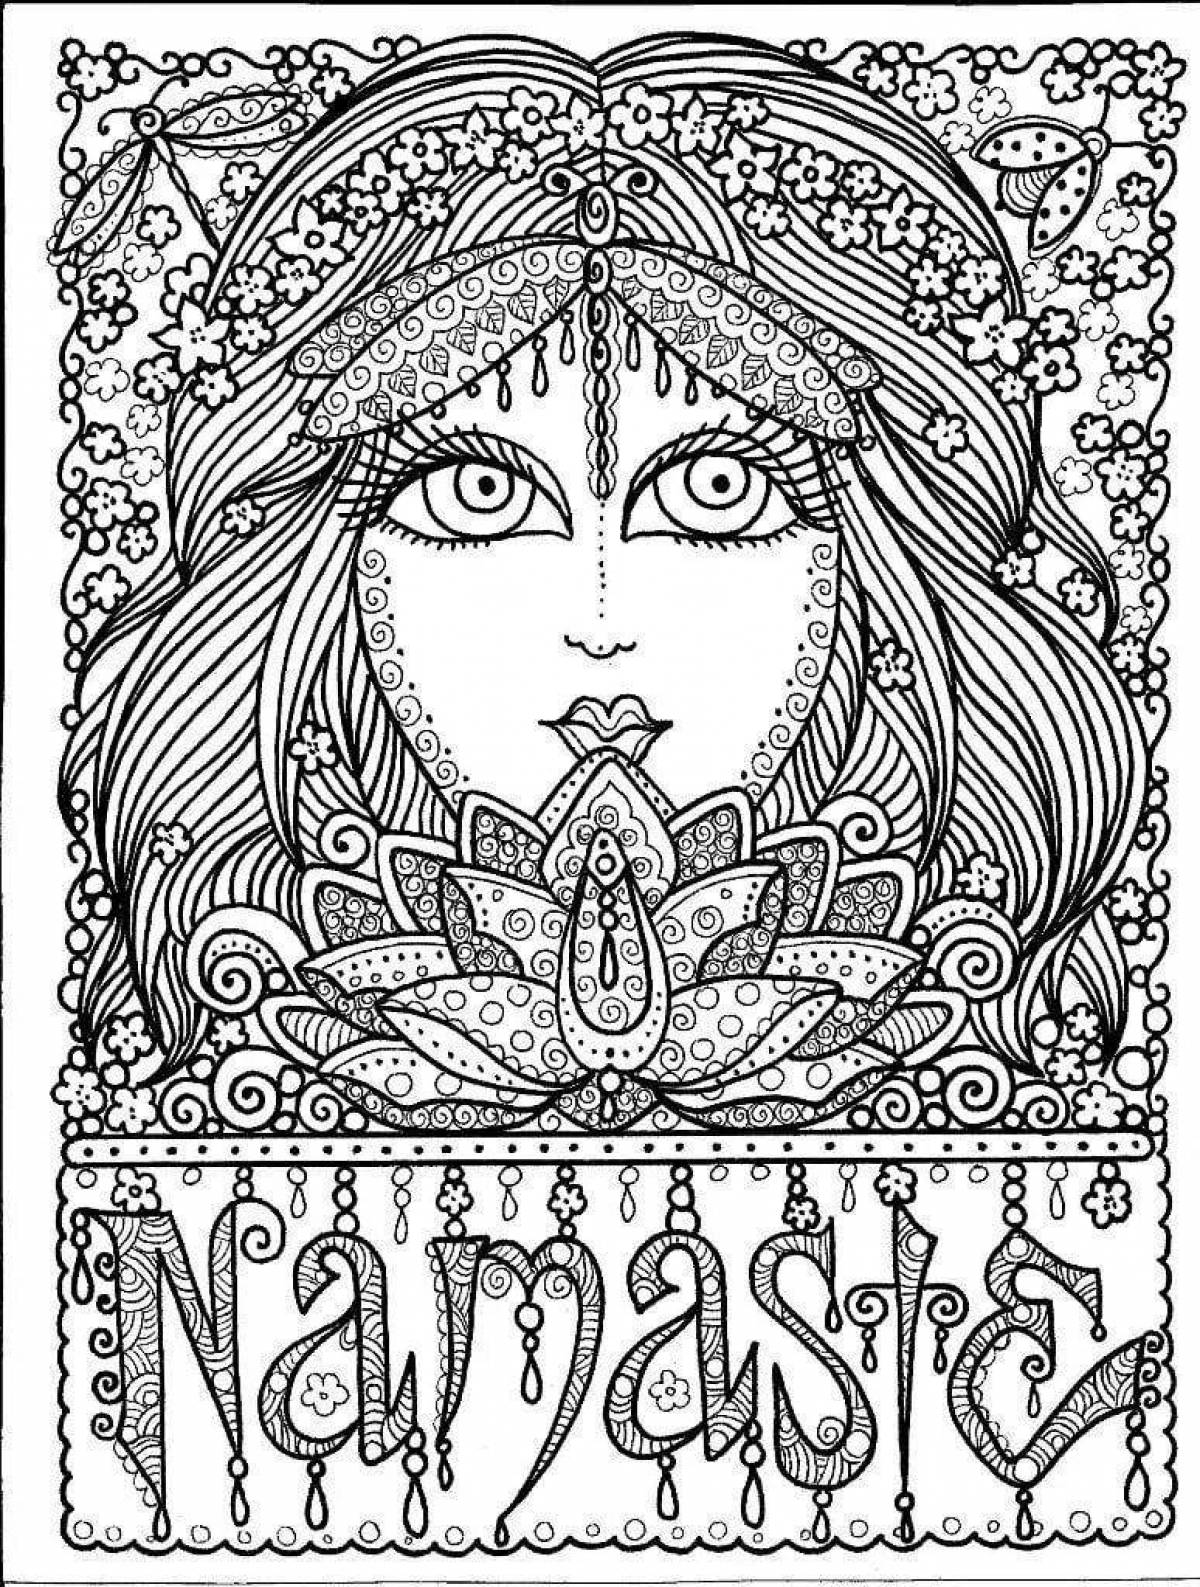 Majestic coloring page art yoga